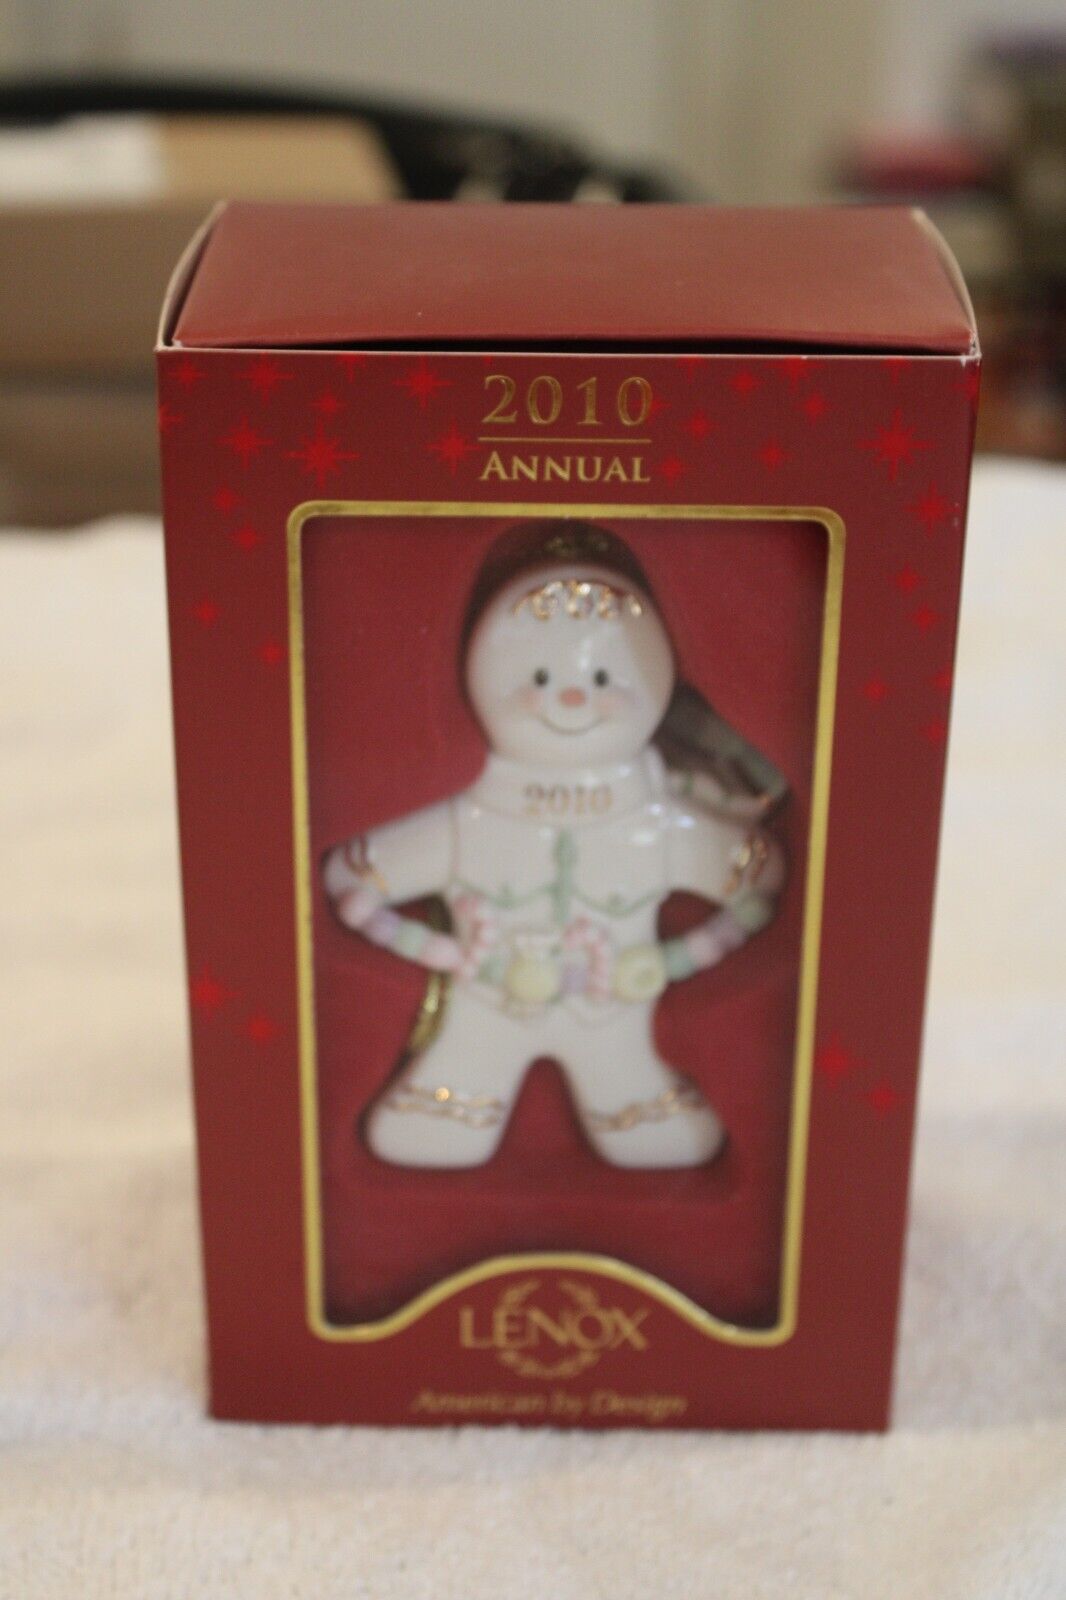 Lenox Ornament 2010 Spicy and Sweet Gingerbread Ornament NEW